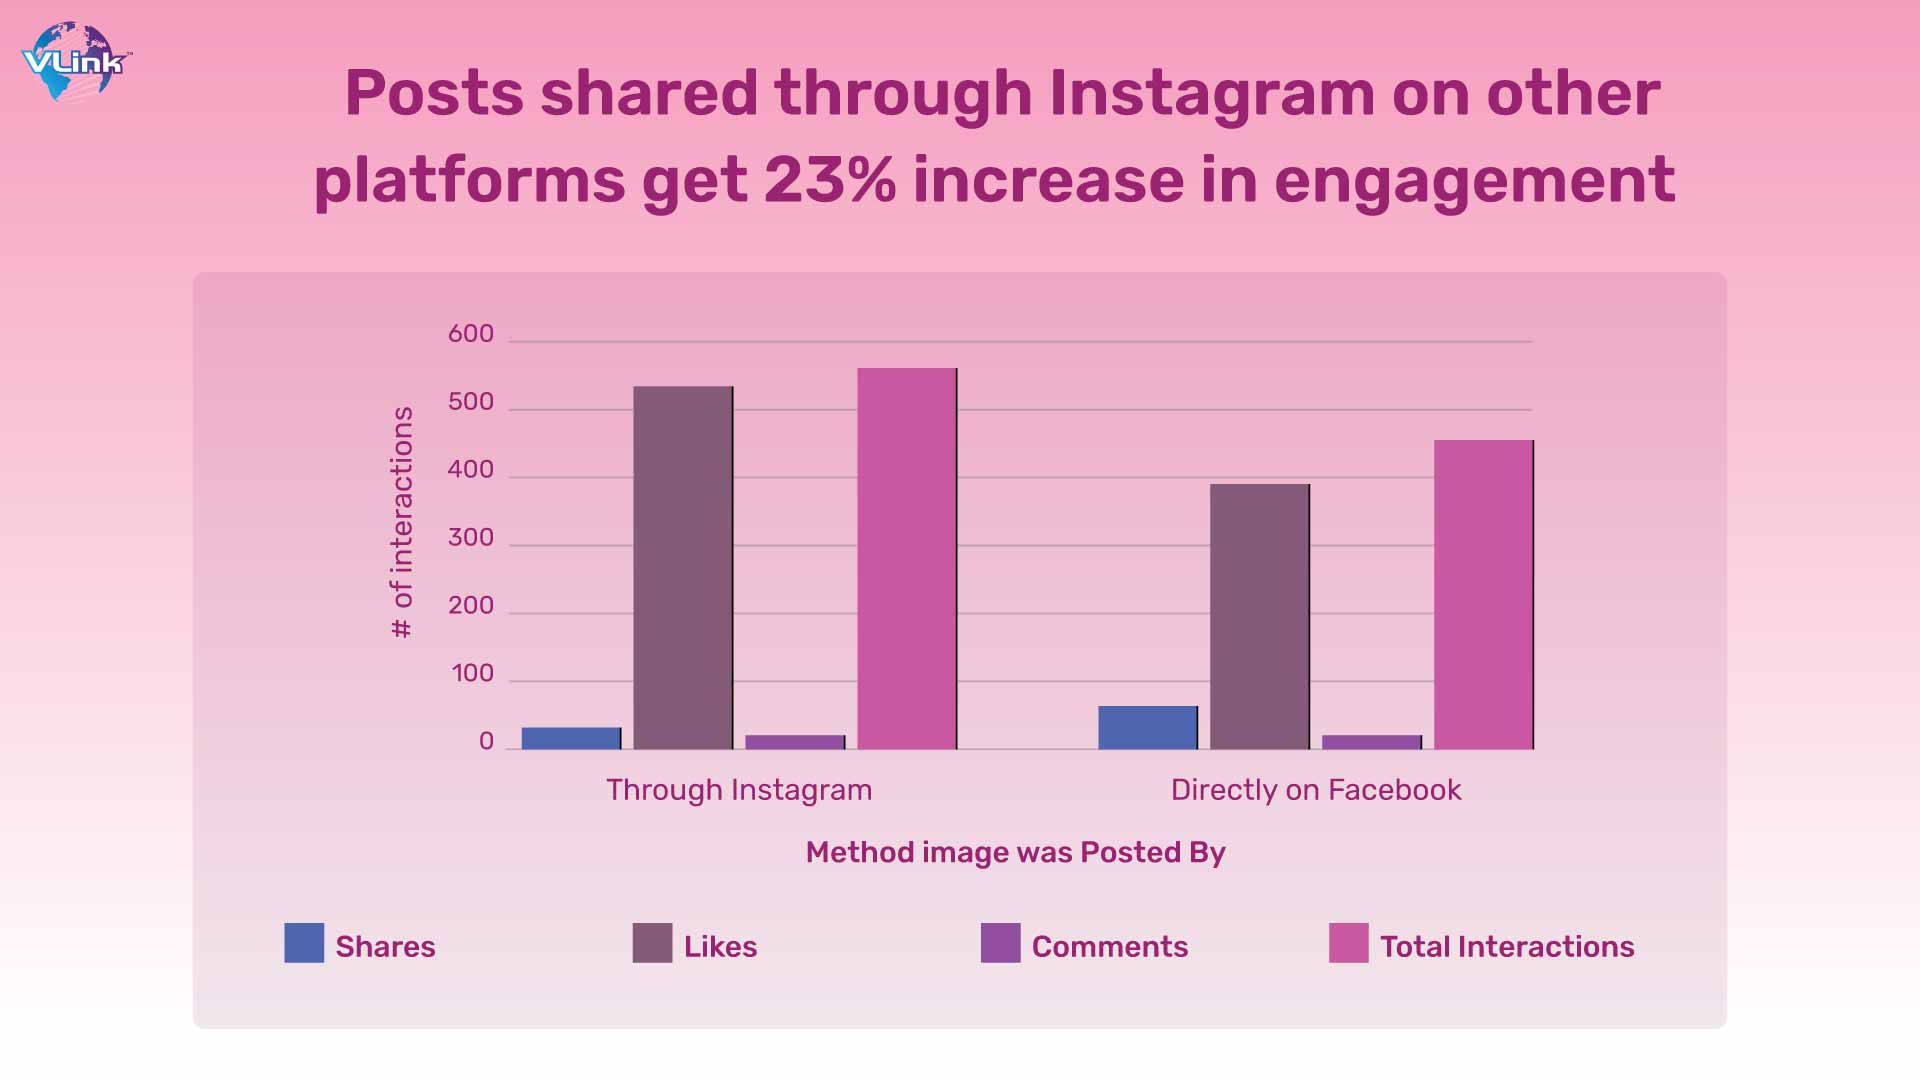 Posts shared through Instagram on other platforms get 23% increase in engagement